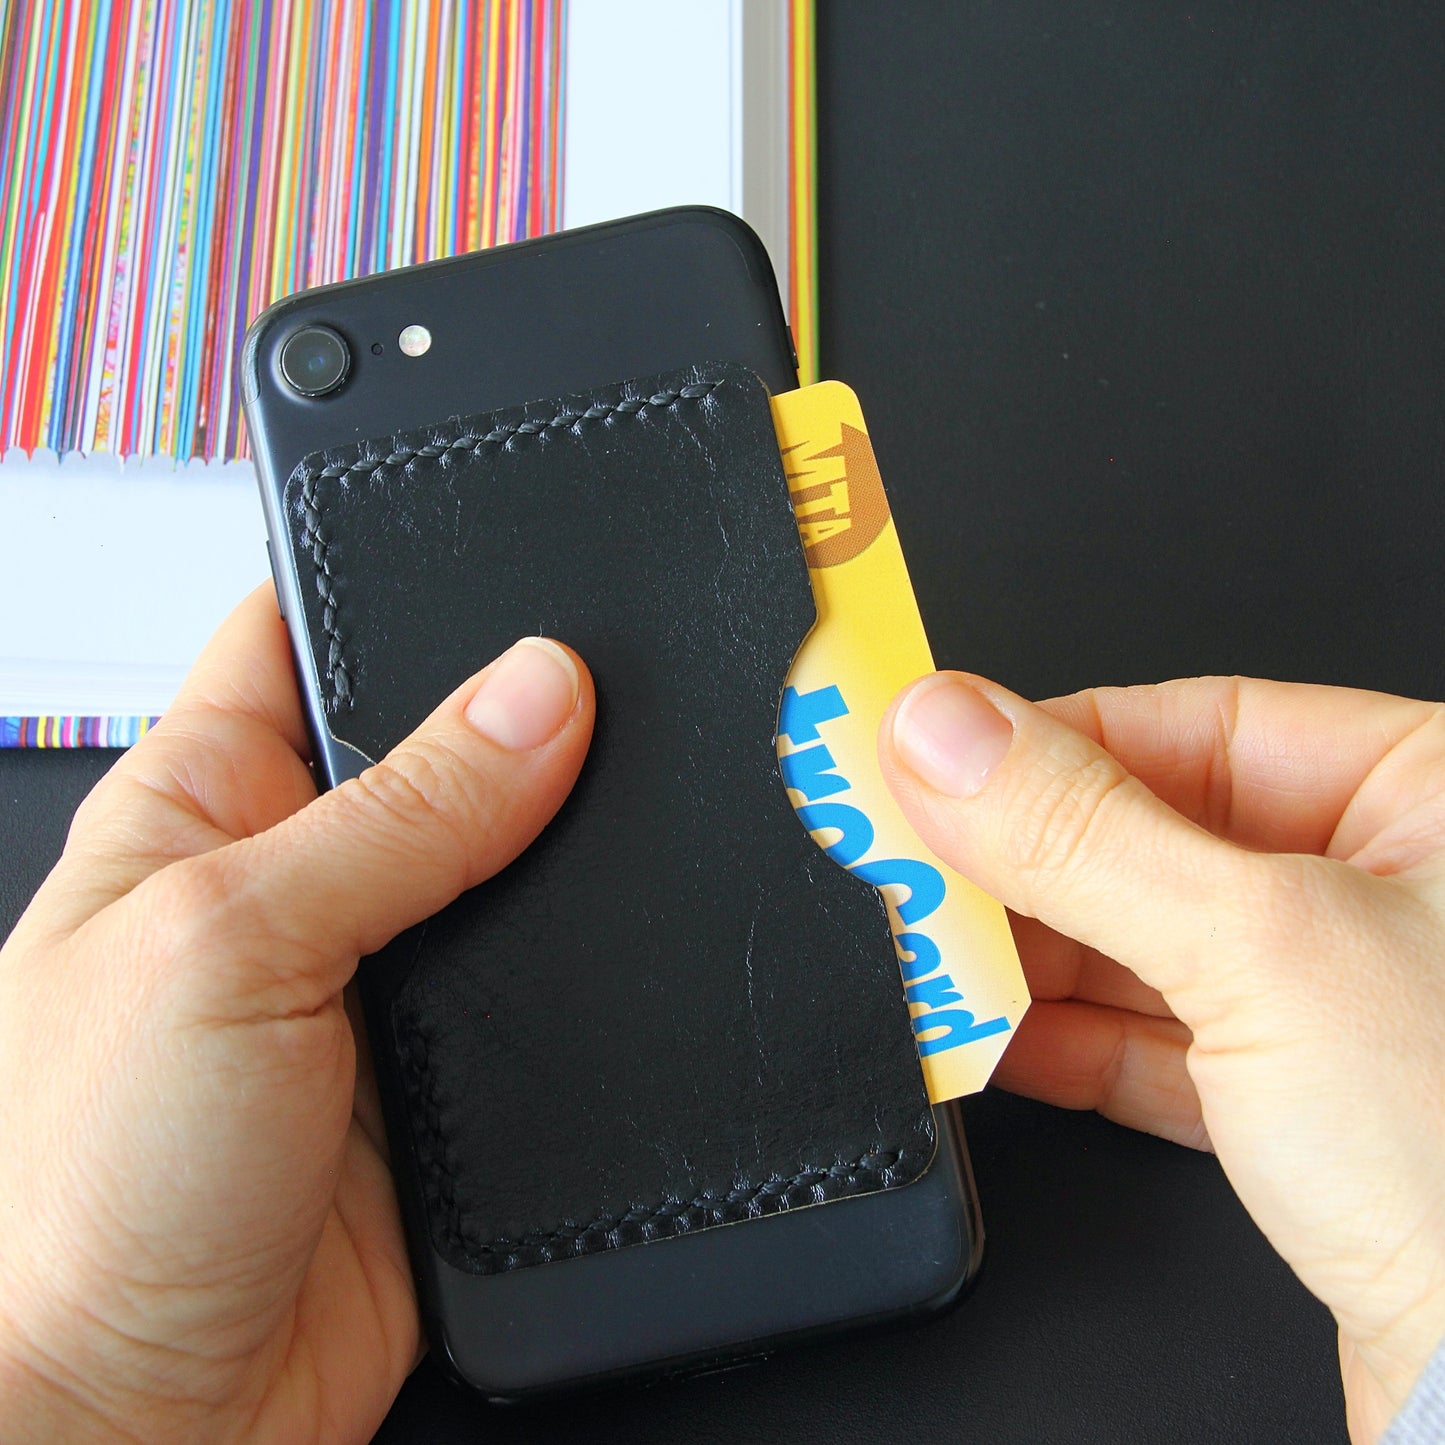 No.14 - Stick on Phone Wallet - Limited Edition